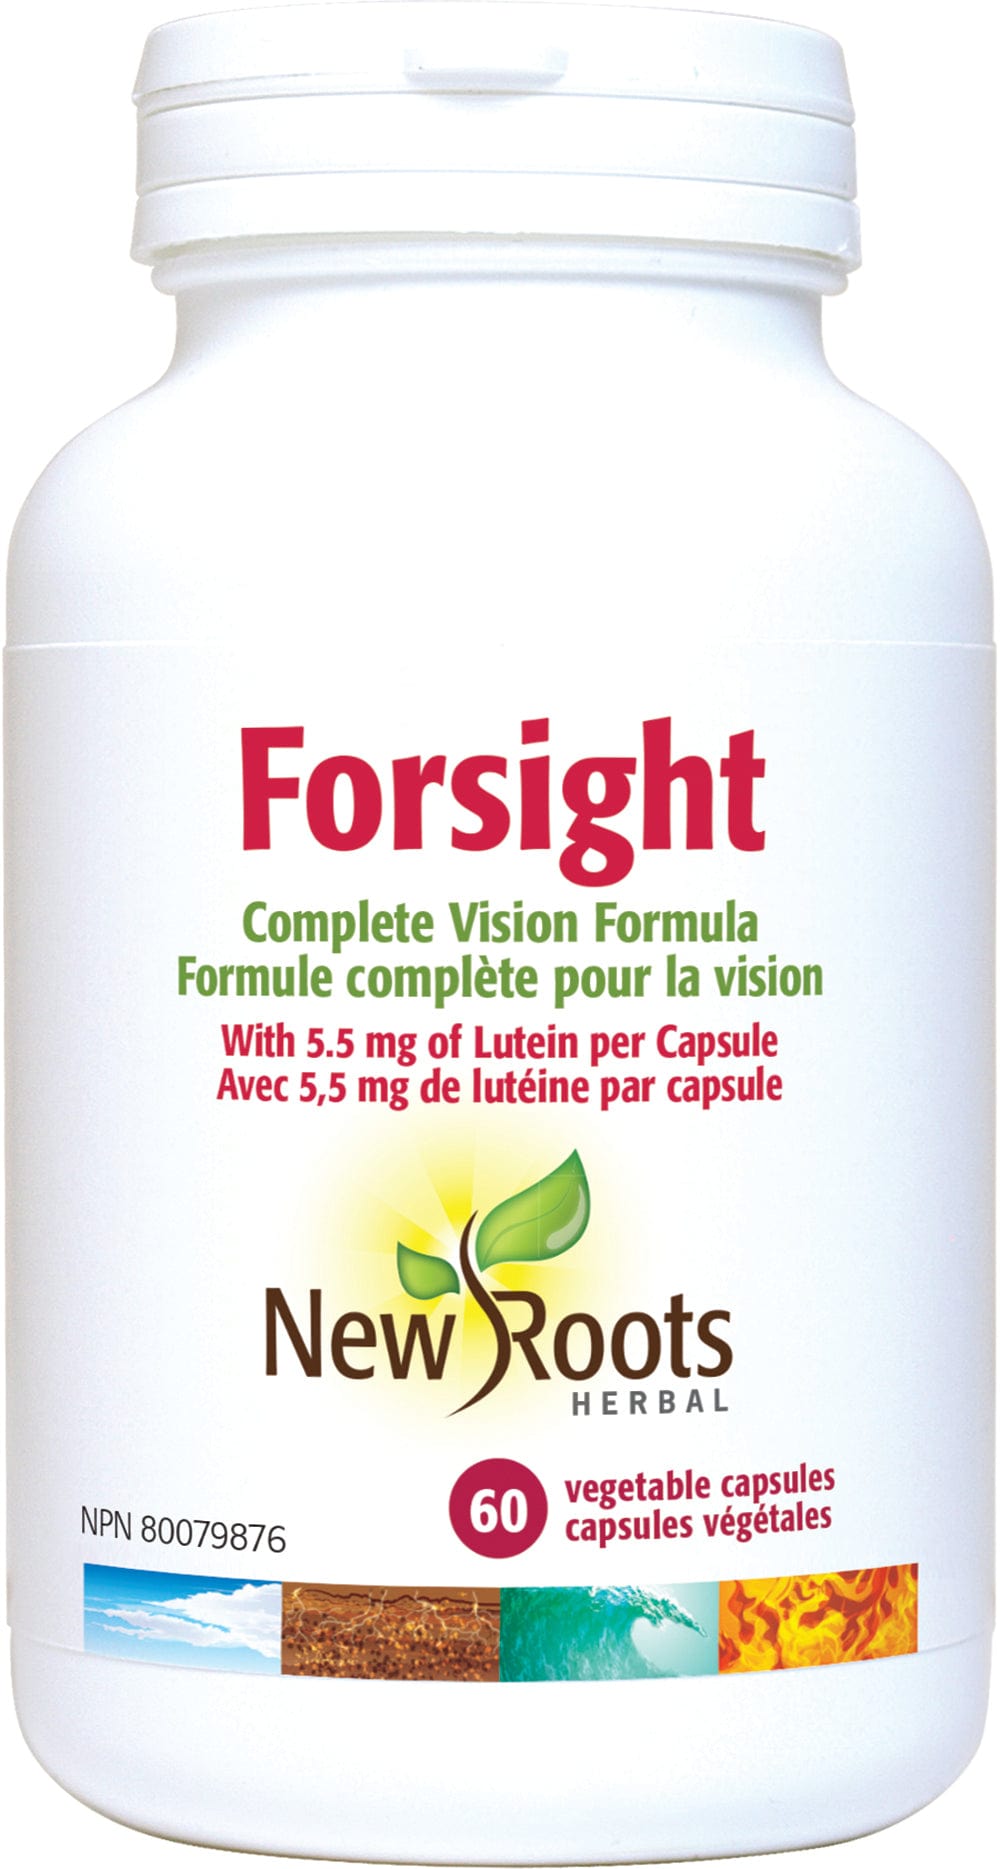 NEW ROOTS HERBAL Suppléments Forsight / Vision + 60vcaps